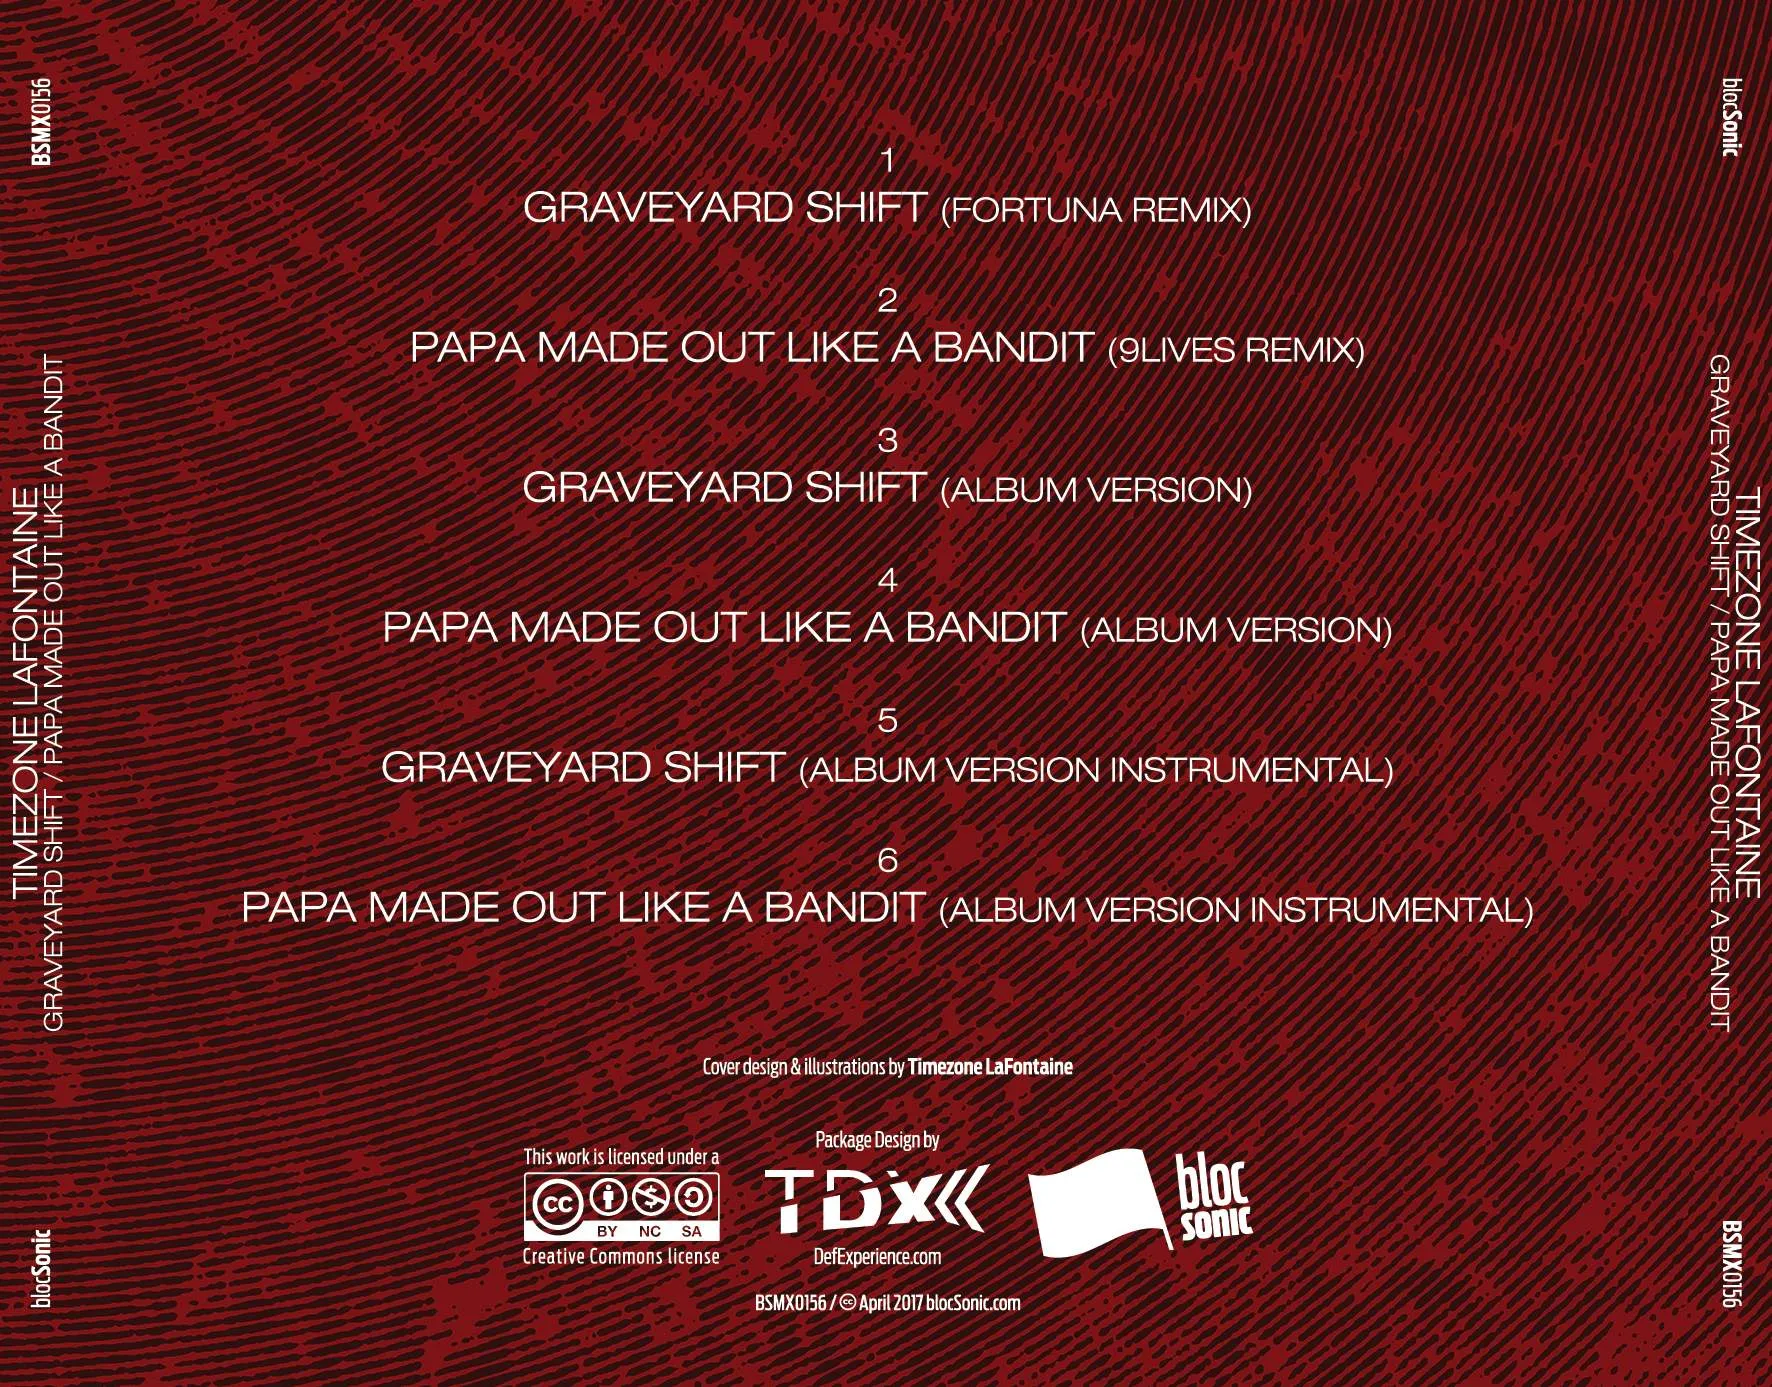 Album traycard for “Graveyard Shift / Papa Made Out Like a Bandit” by Timezone Lafontaine